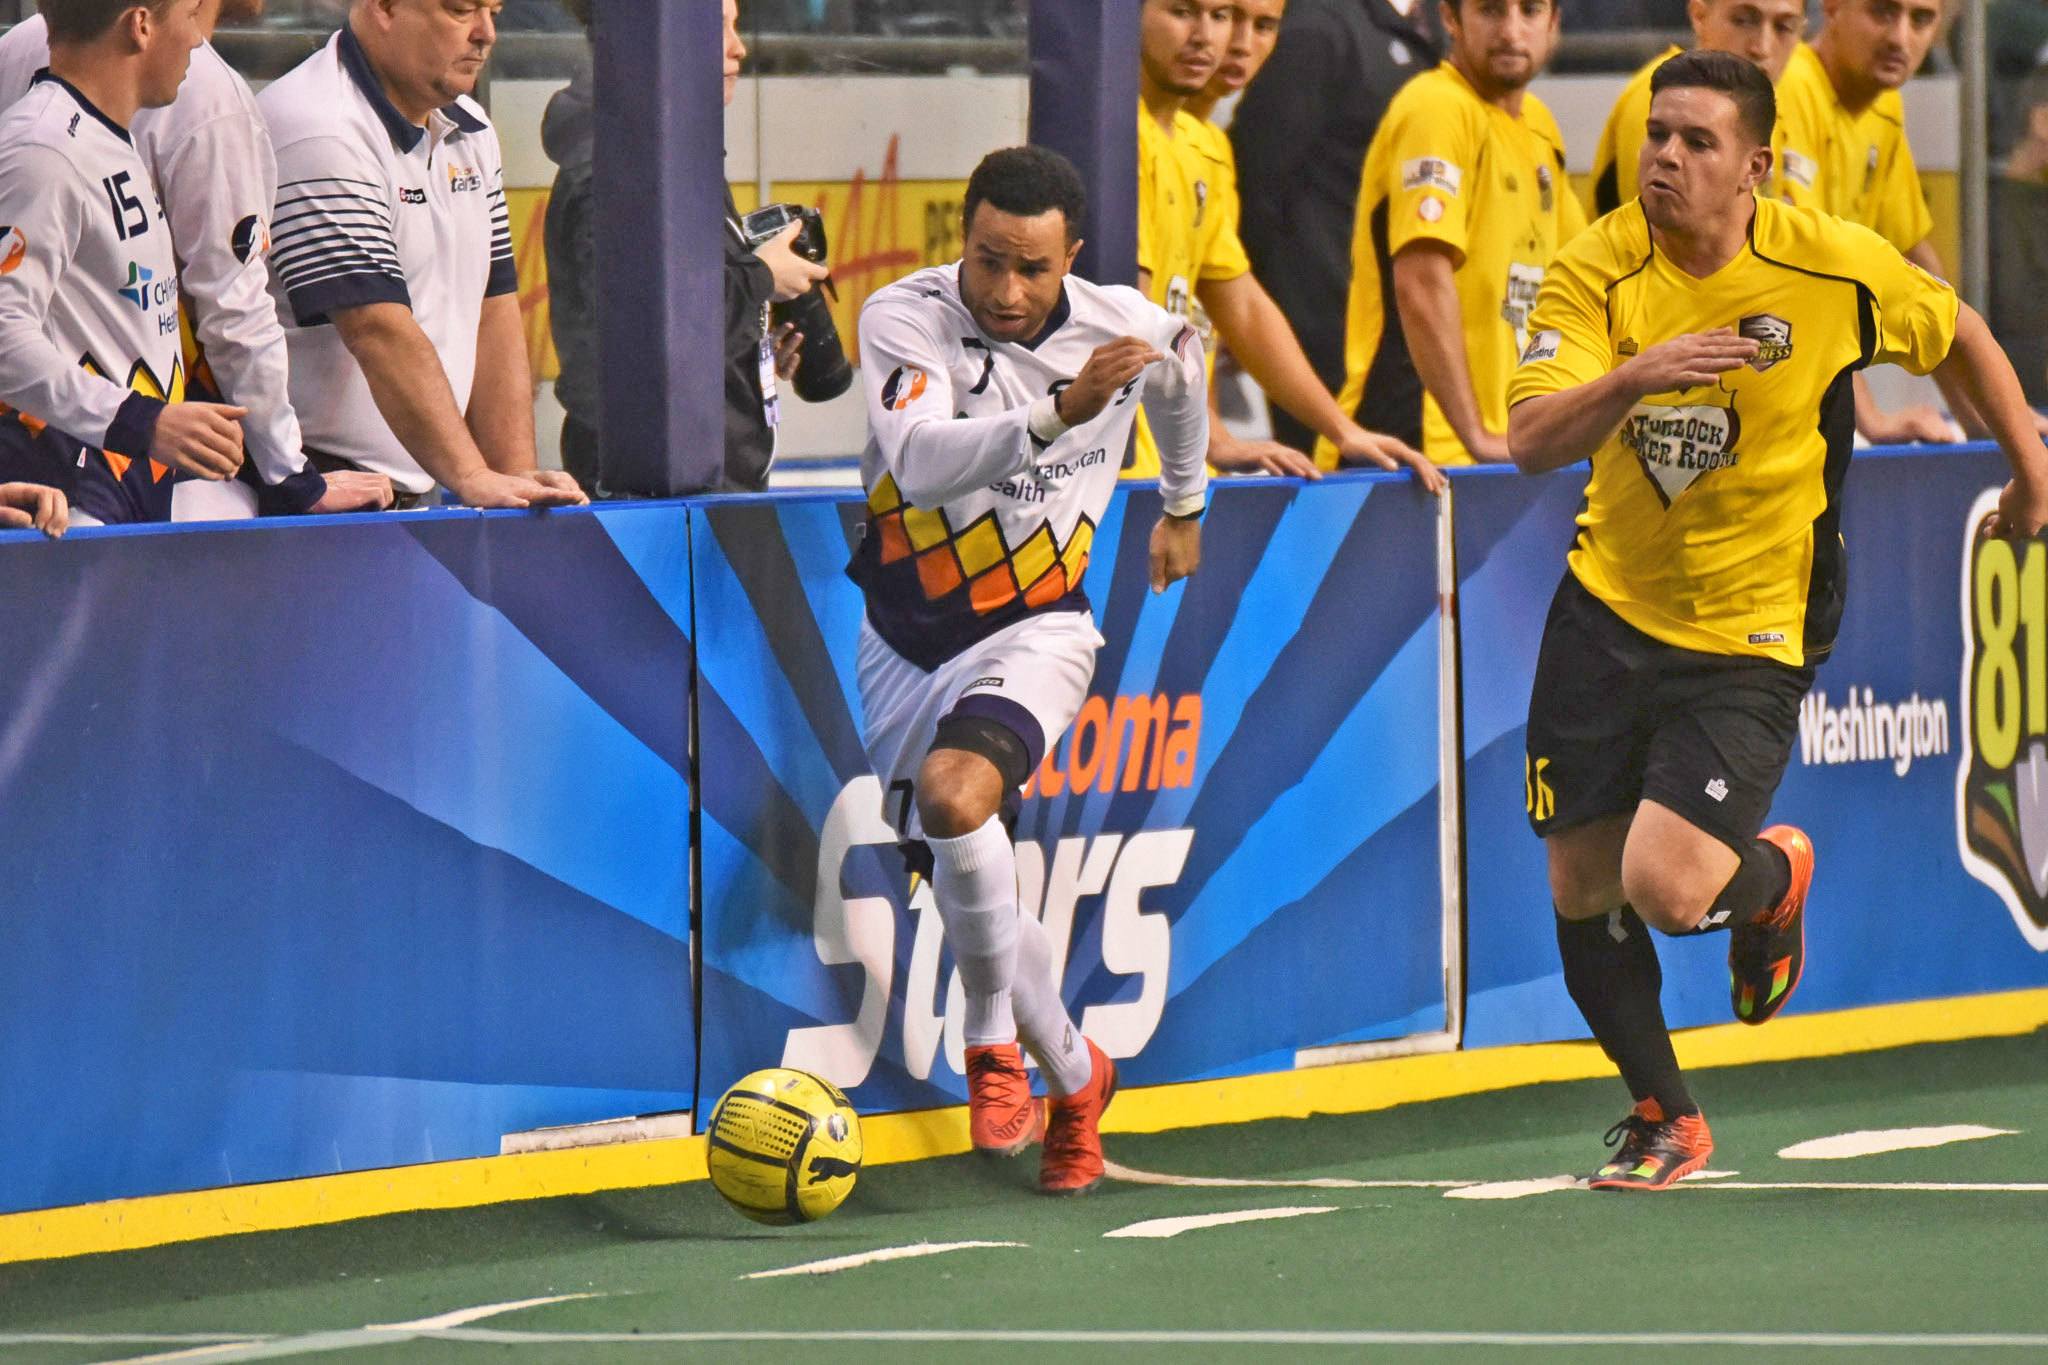 The Stars’ Raphael Cox charges upfield against Turlock last season. The MASL teams tangle Friday in California’s central valley. COURTESY PHOTO, Red Williamson/Tacoma Stars